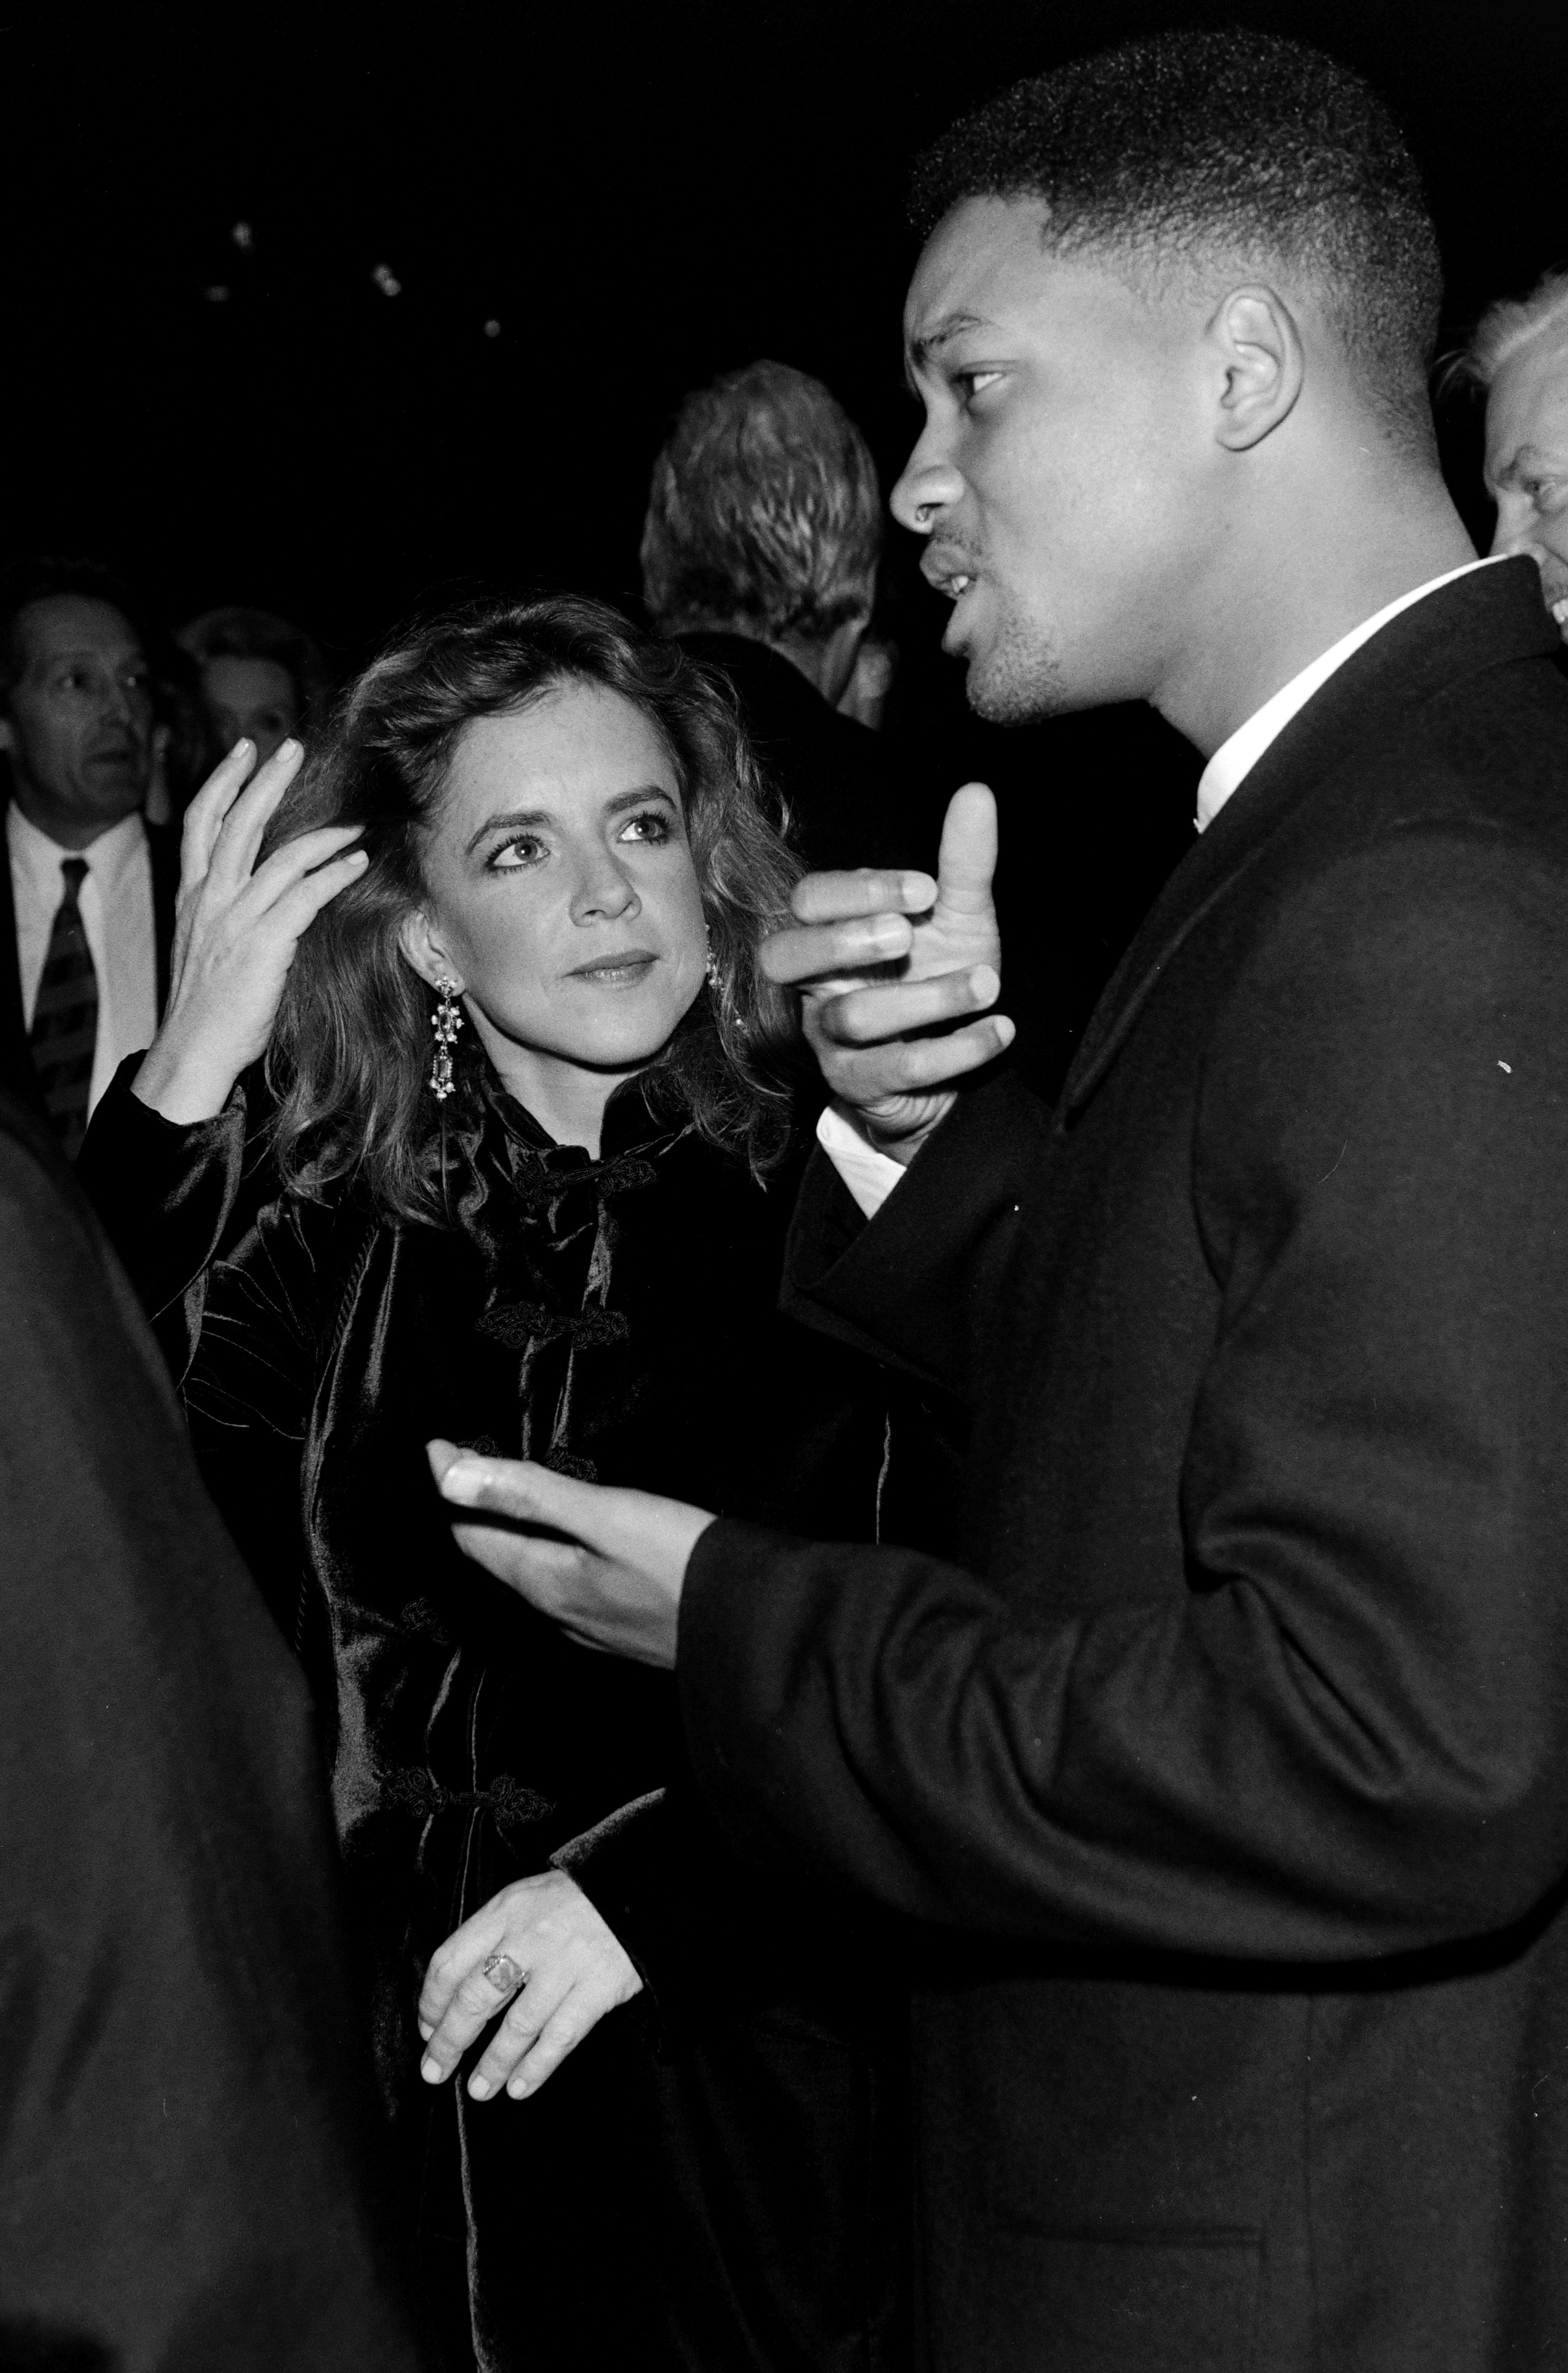 Stockard Channing and Will Smith